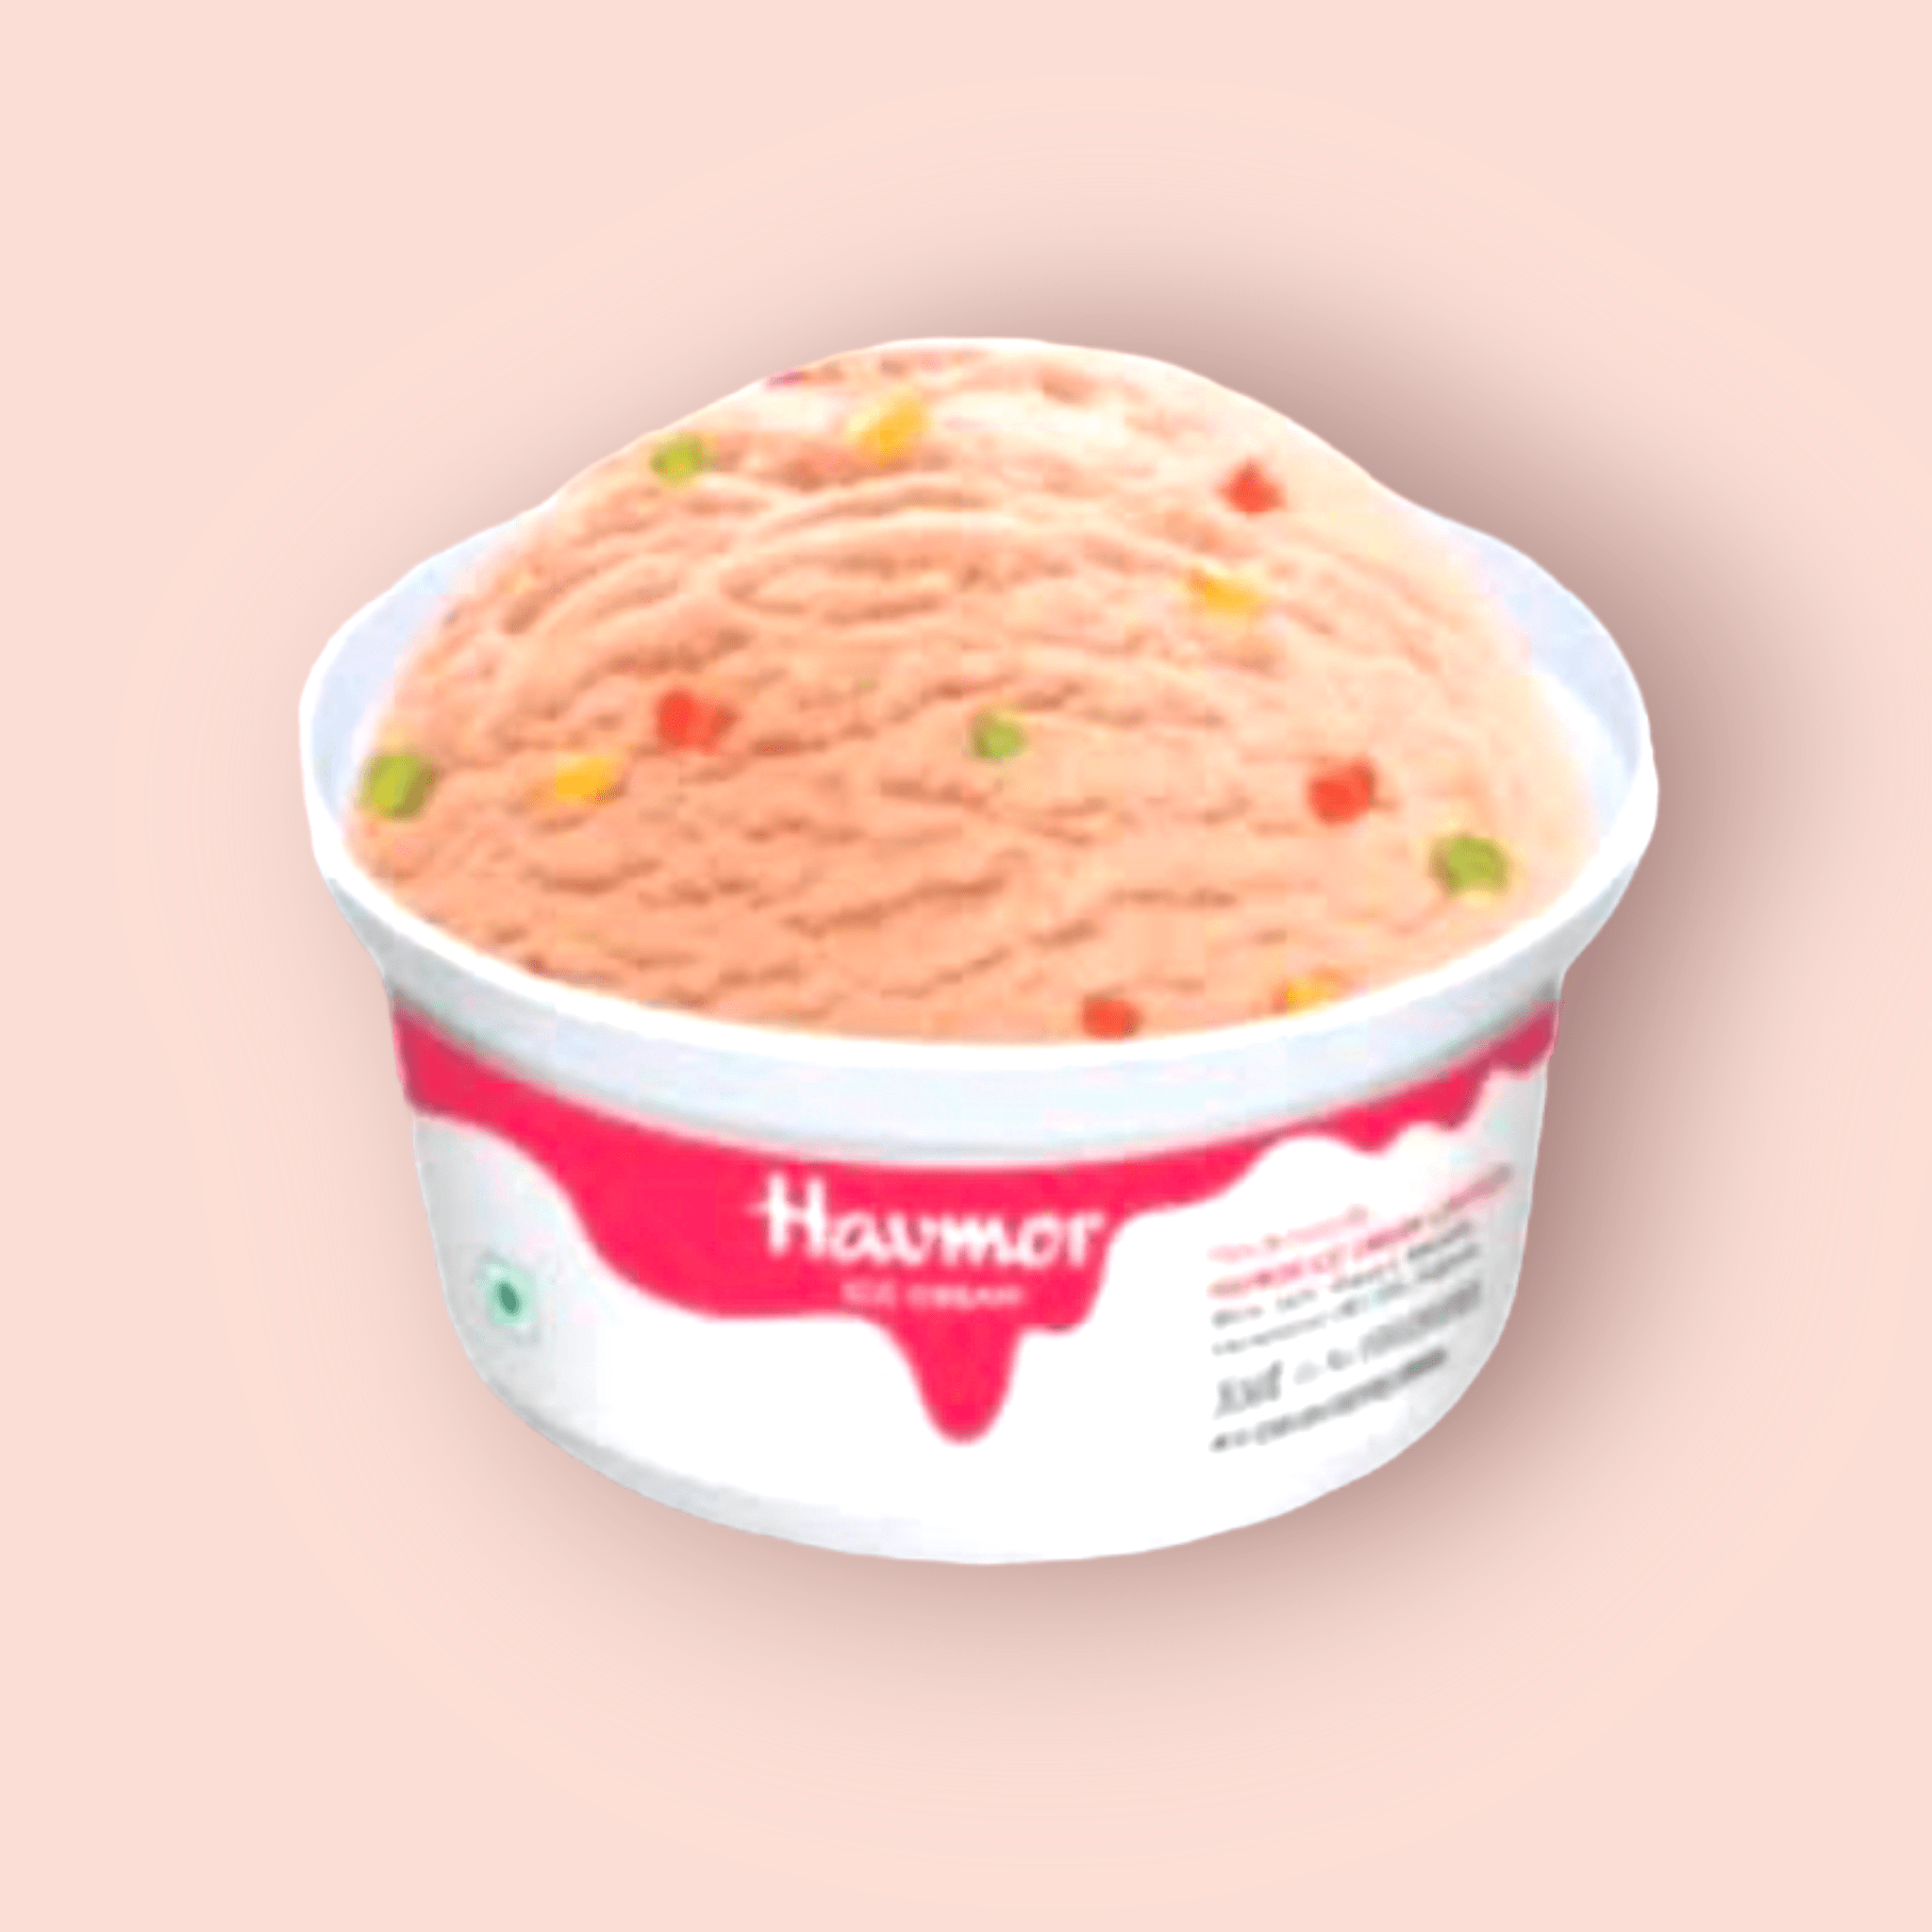 Youngdong Jin - Chief Operating Officer - LOTTE [Havmor Icecream] | LinkedIn